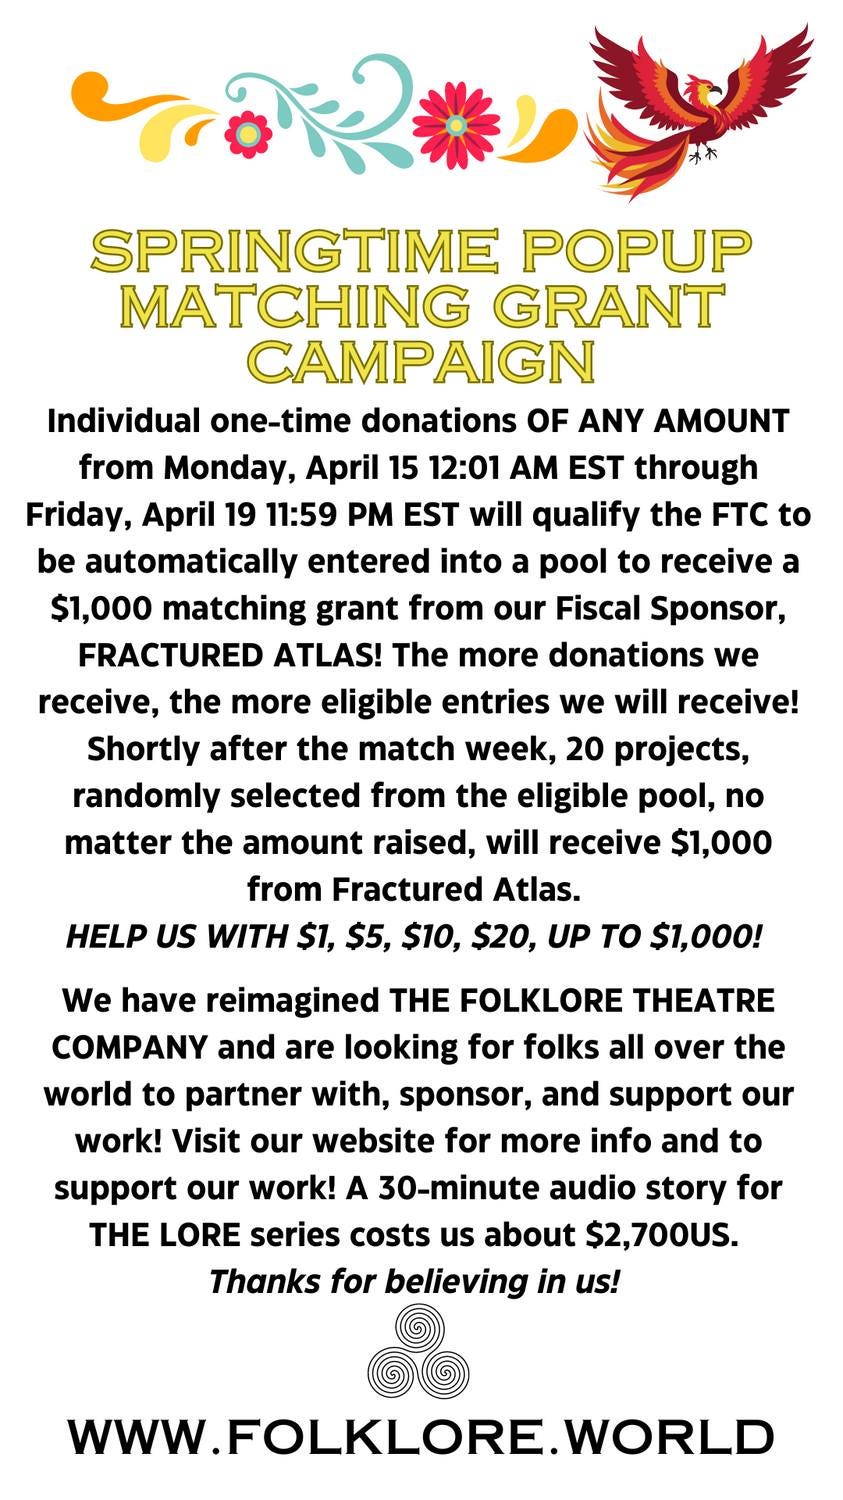 May be an image of text that says 'receive MATCHING GRANT CAMPAIGN Individual ANY AMOUNT from Monday, April 15 12:01 EST through Friday, 11:59 PM EST will qualify the be automatically entered into pool matching grant from our Fiscal Sponsor, FRACTURED ATLAS! The more donations receive, more eligible entries we will receive! Shortly after the match week, 20 projects, randomly selected from the eligible matter the amount raised, will receive Atlas. from WITH FOLKLORE THEATRE folks have reimagined COMPANY and are looking partner with, sponsor, and support our work! Visit our website for more info and support our work! 30-minute audio story LORE series costs about Thanks'